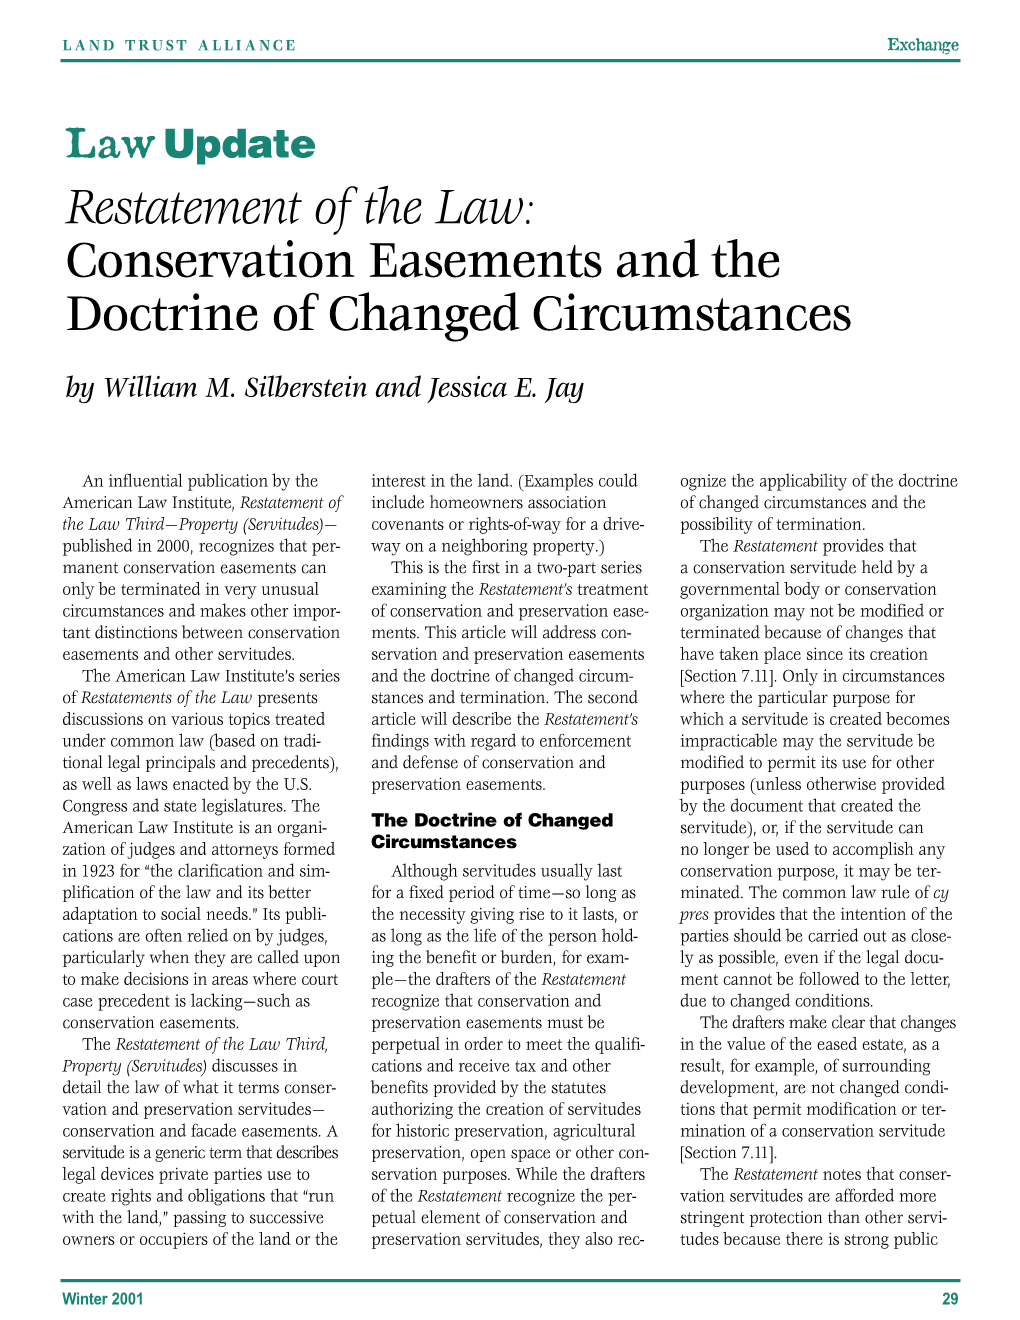 Conservation Easements and the Doctrine of Changed Circumstances